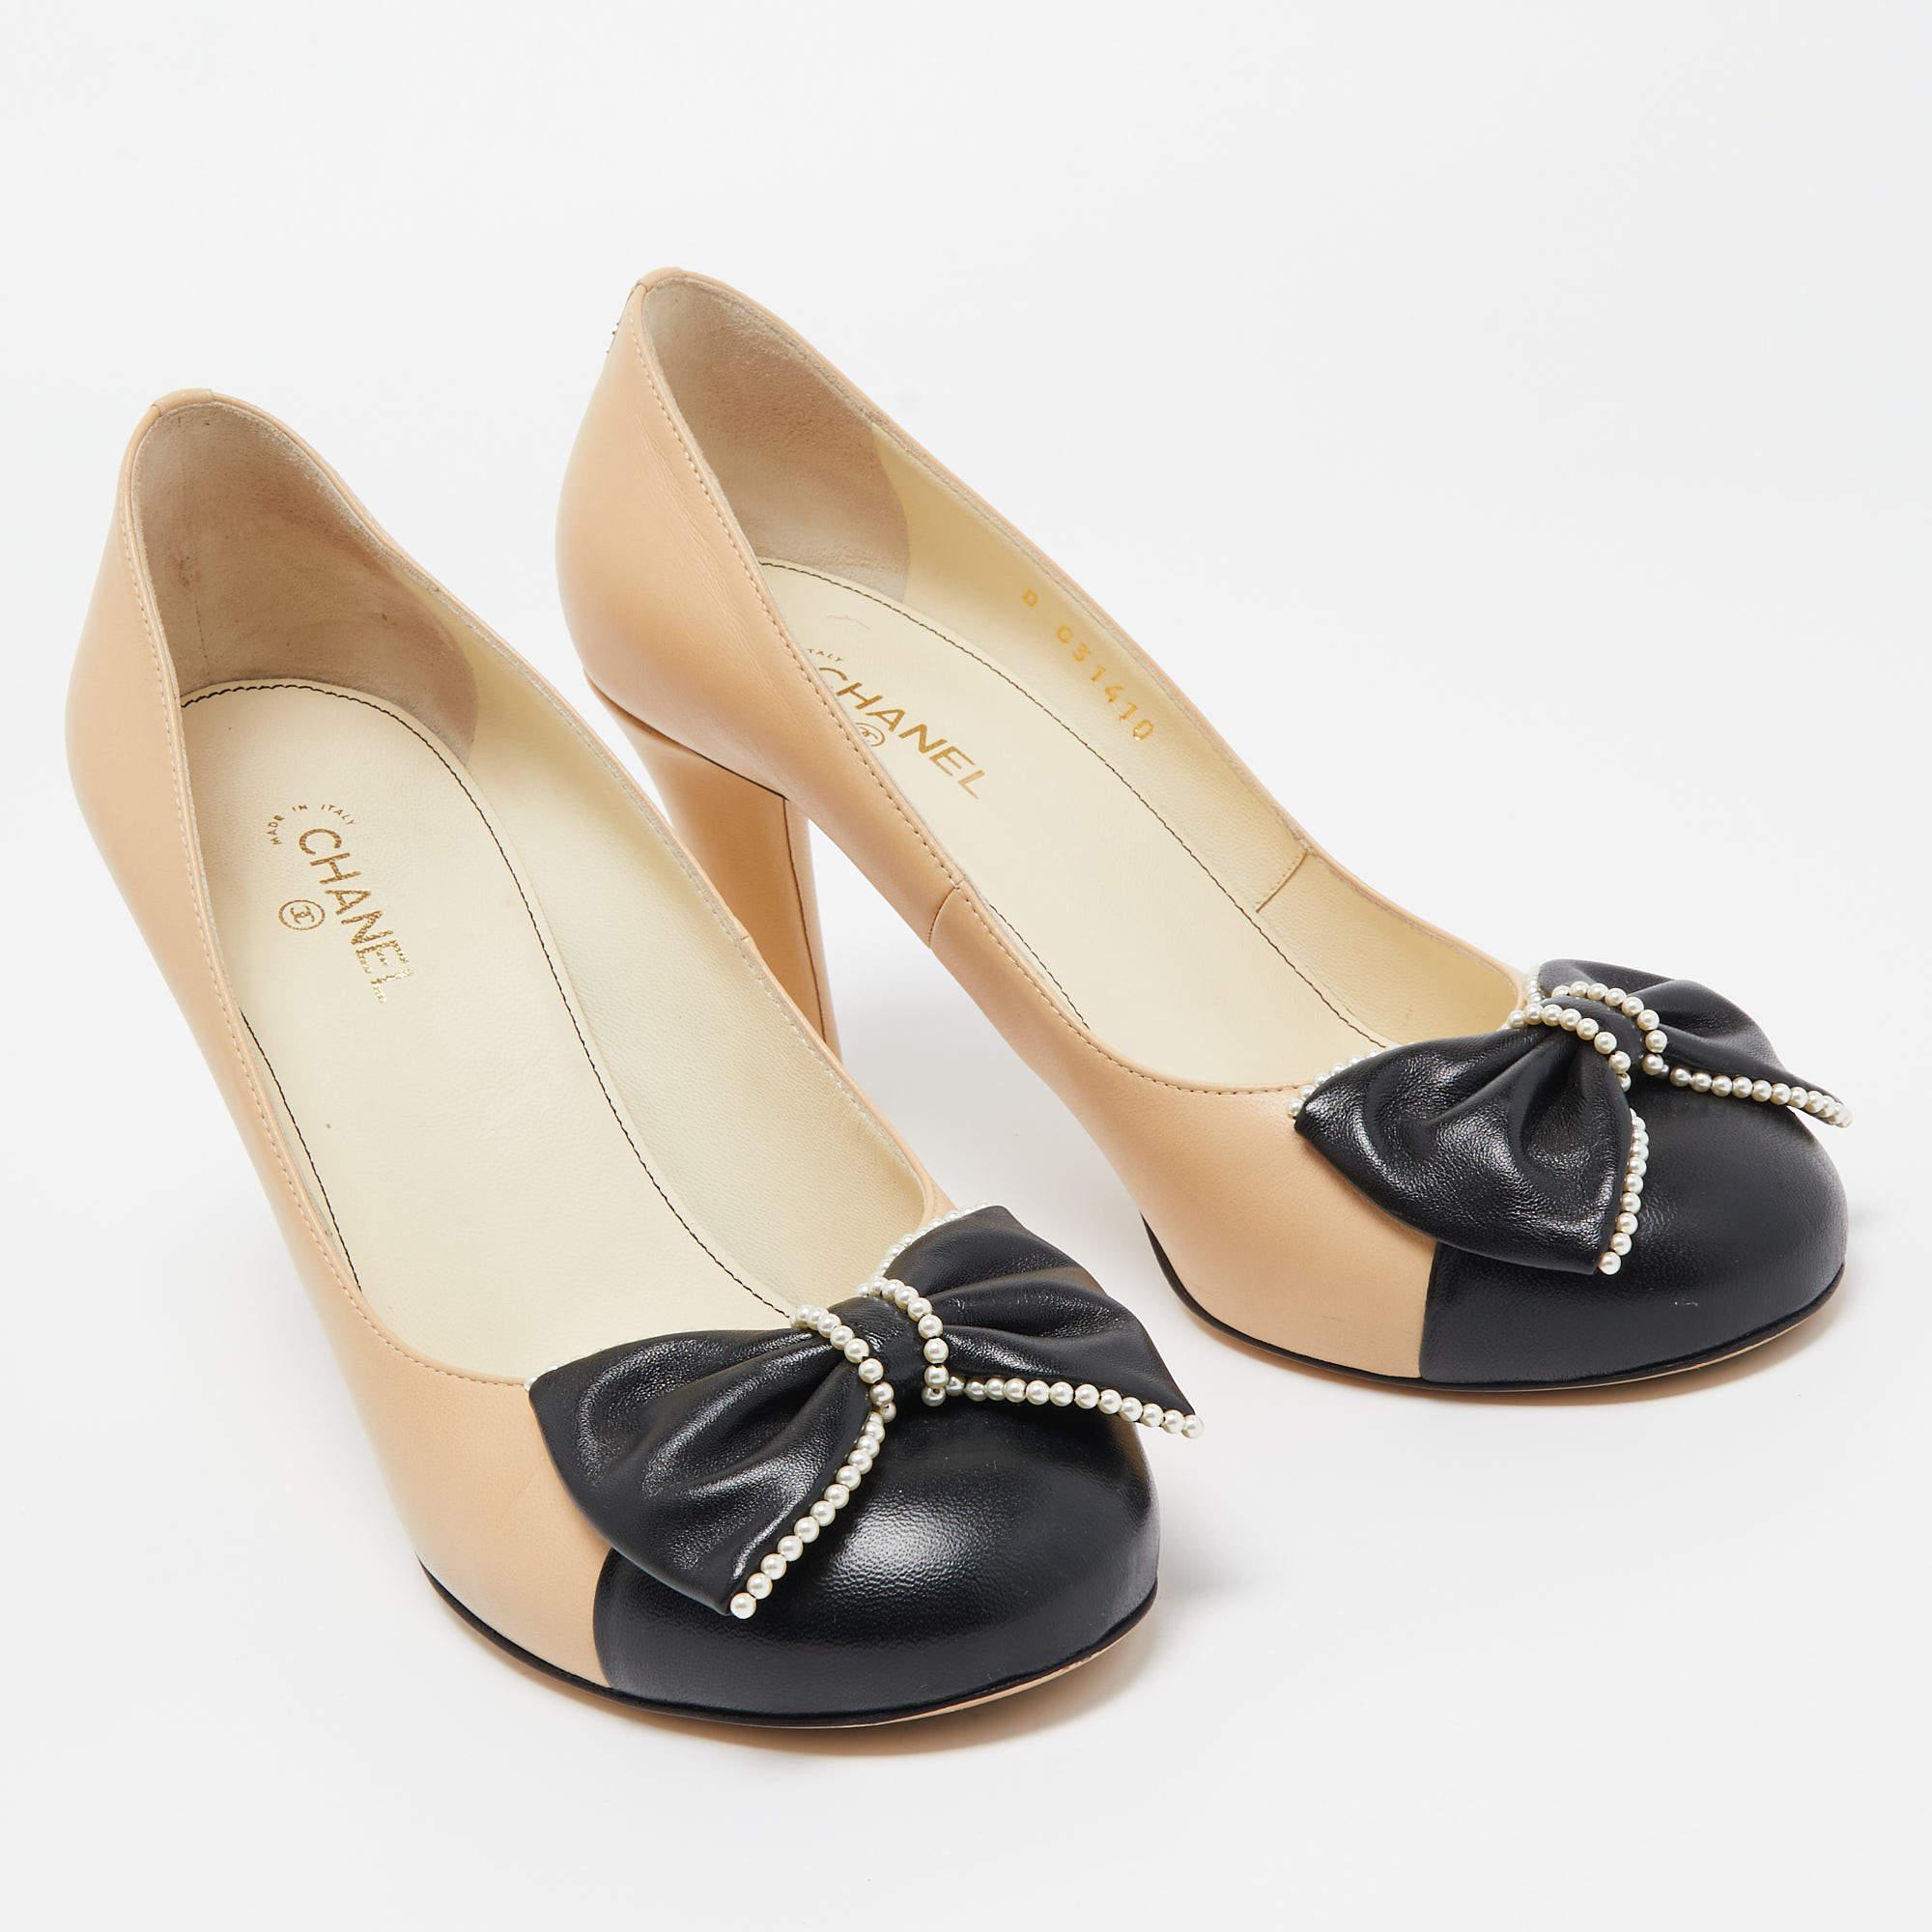 Make a statement with these Chanel two-tone pumps for women. Impeccably crafted, these chic heels offer both fashion and comfort, elevating your look with each graceful step.

